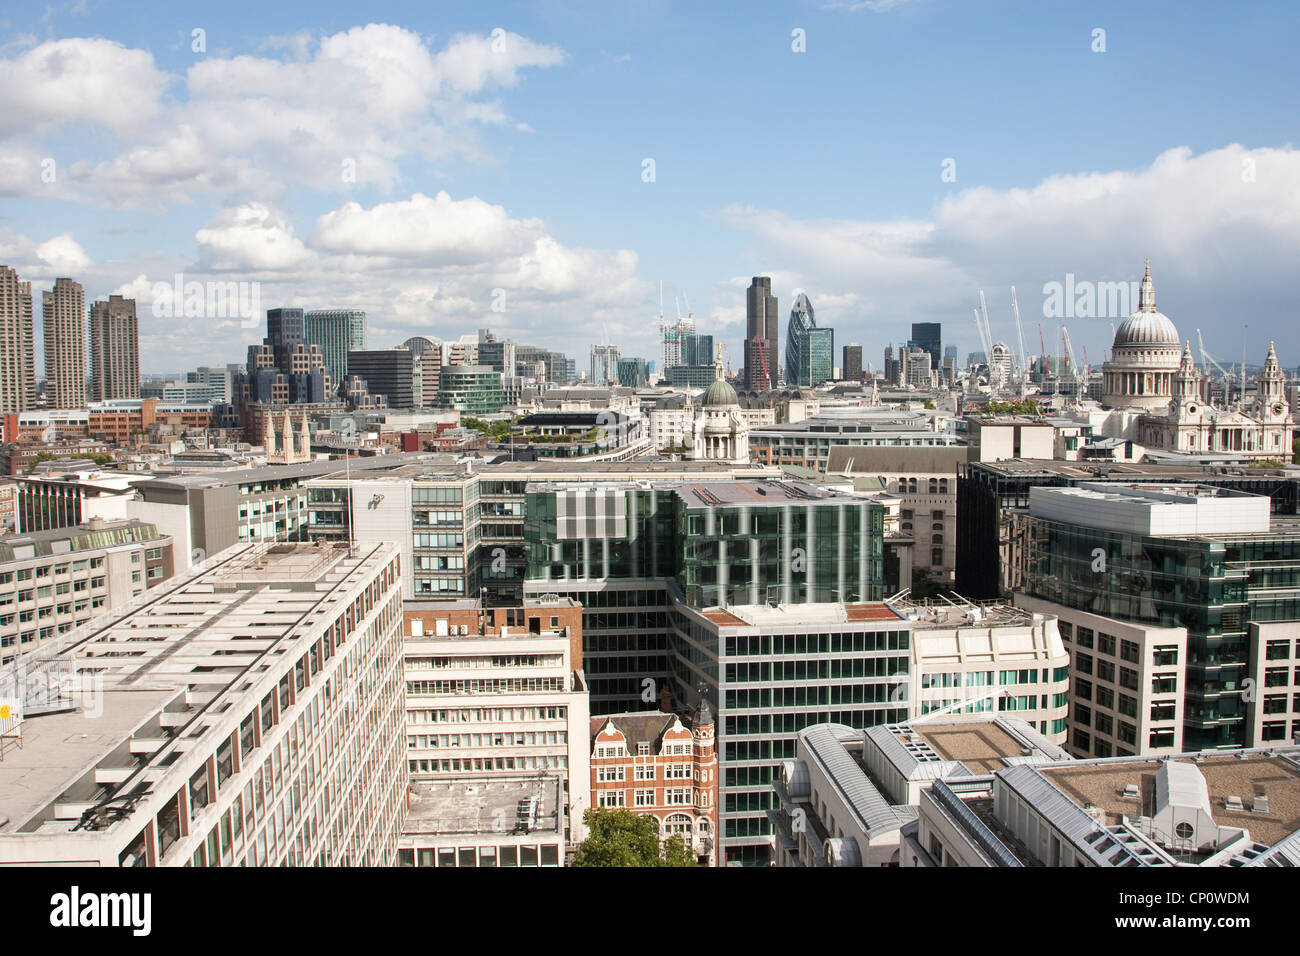 Wide-angle Cityscape across the skyline of the City of London, showing the financial district in the distance, England, UK Stock Photo